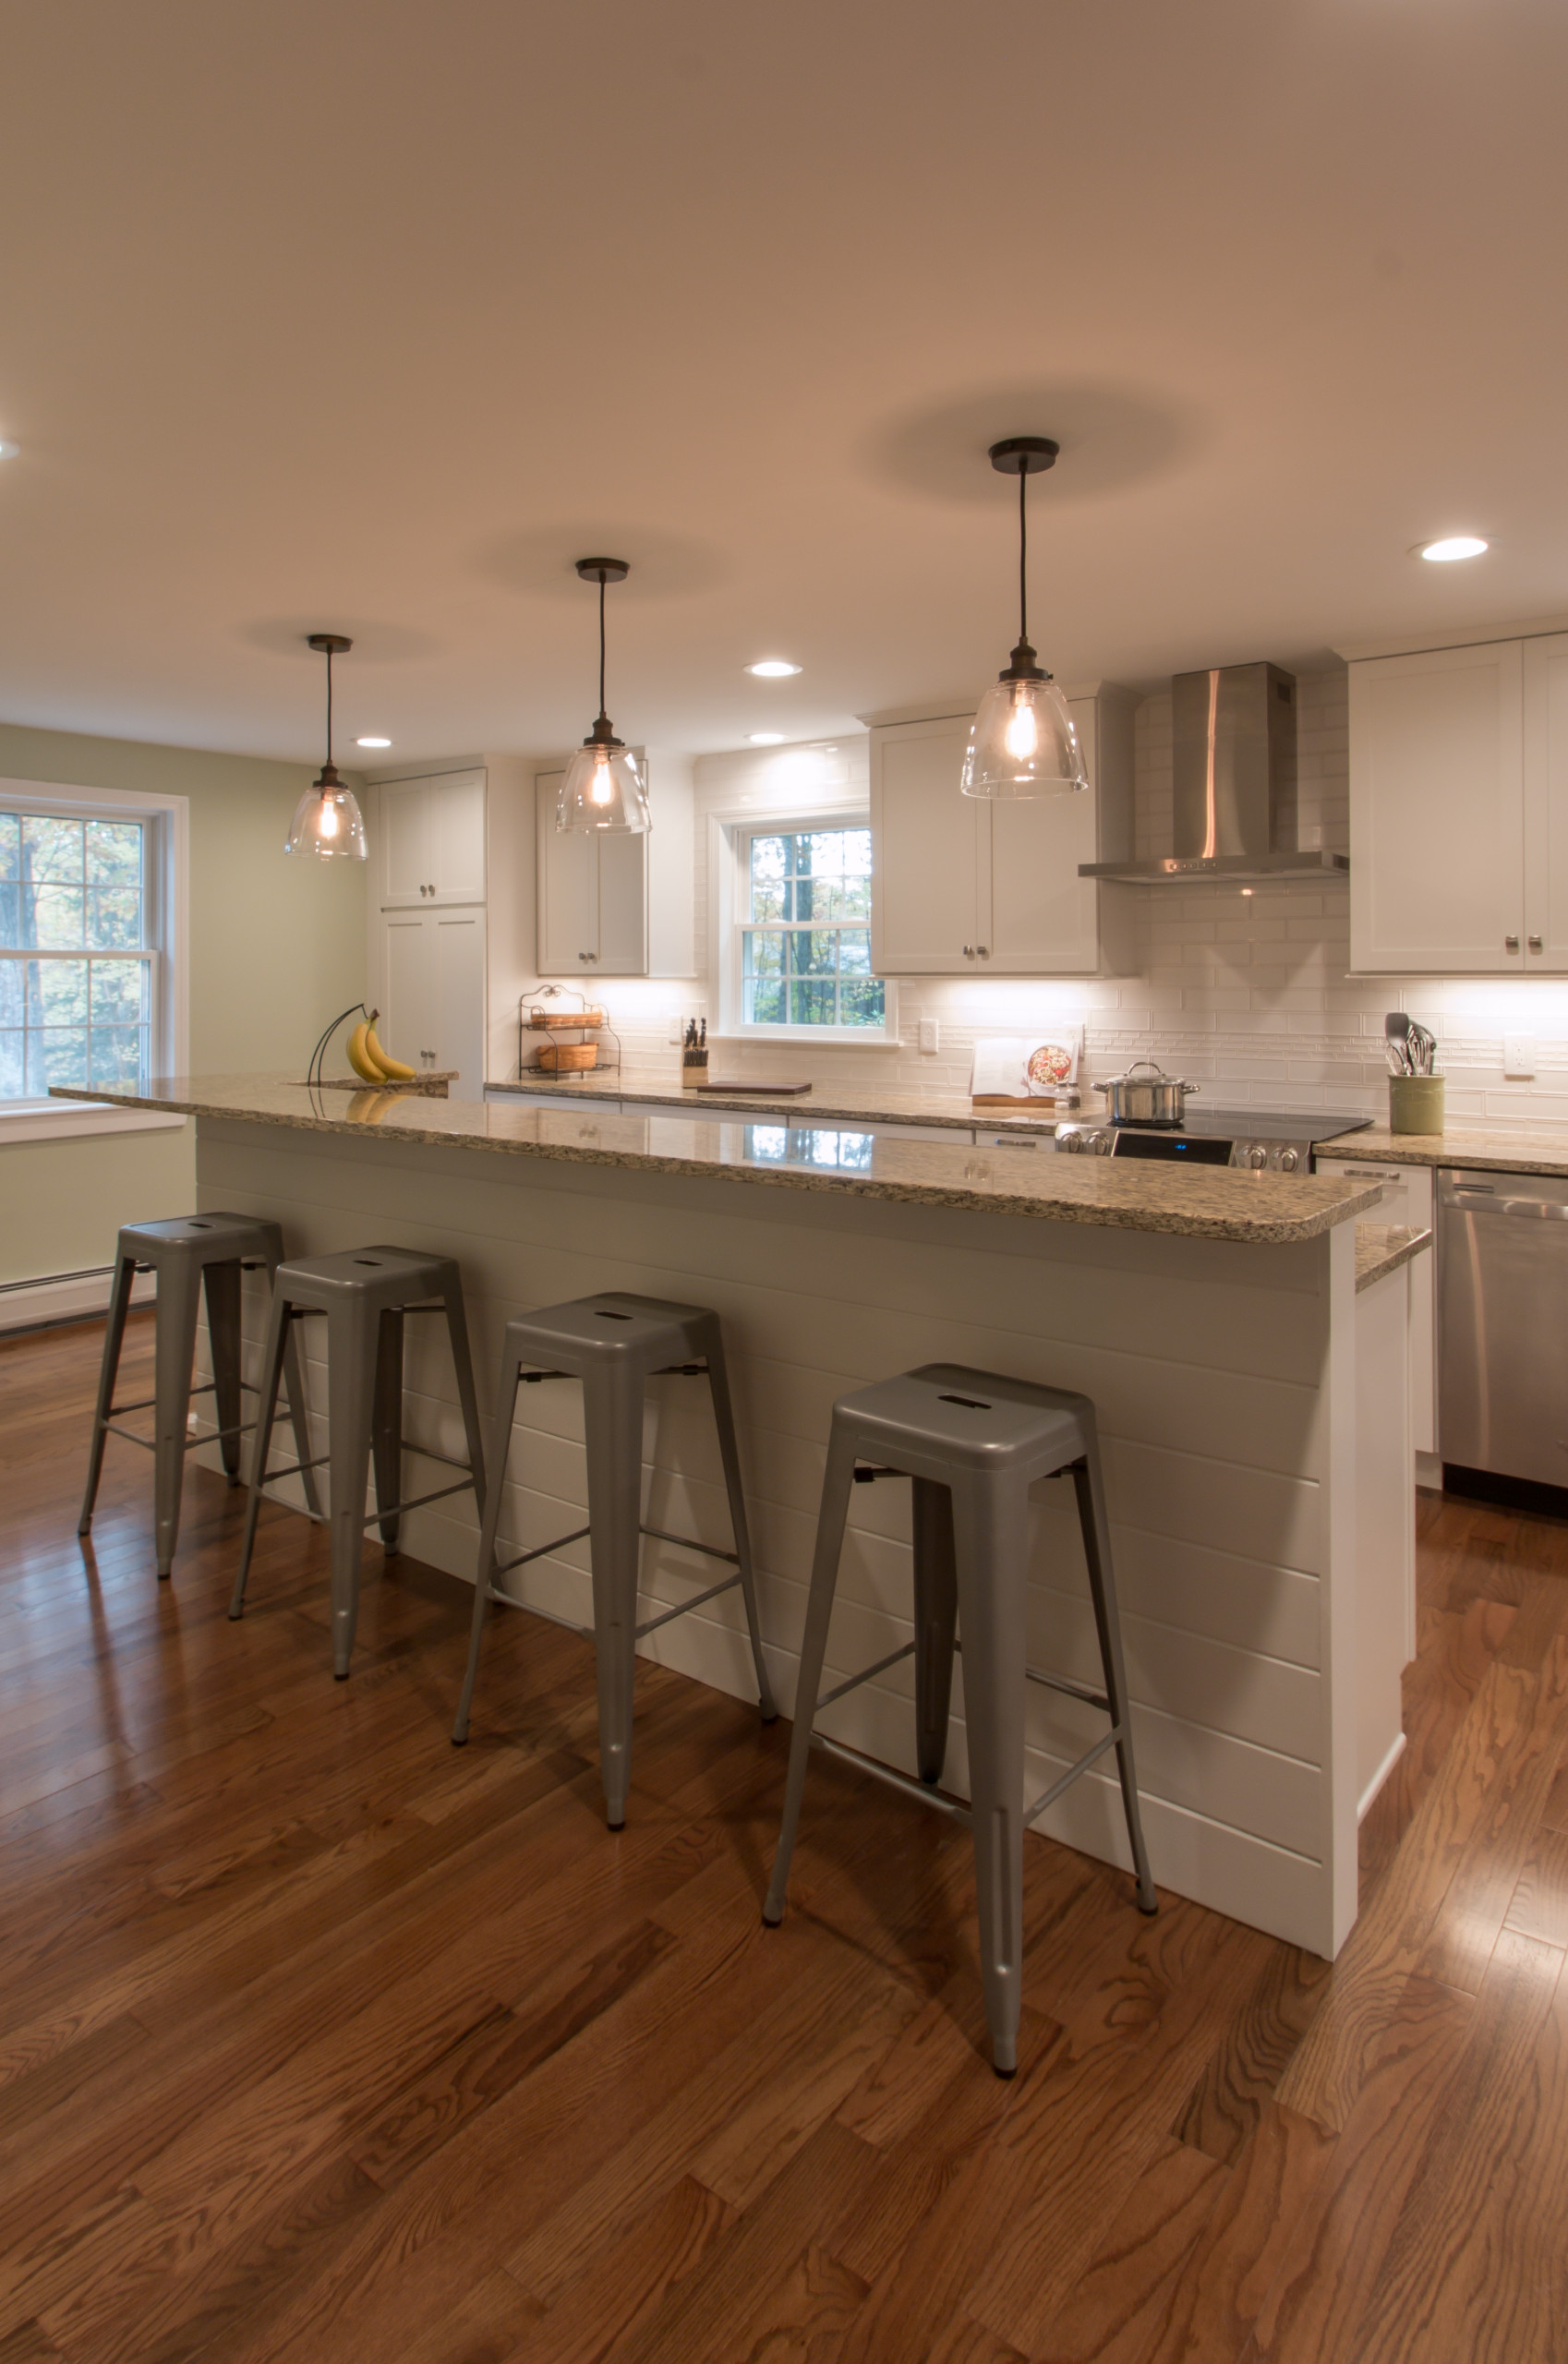 Kitchen Business in the front, shiplap in the back.  This island kitchen has sty